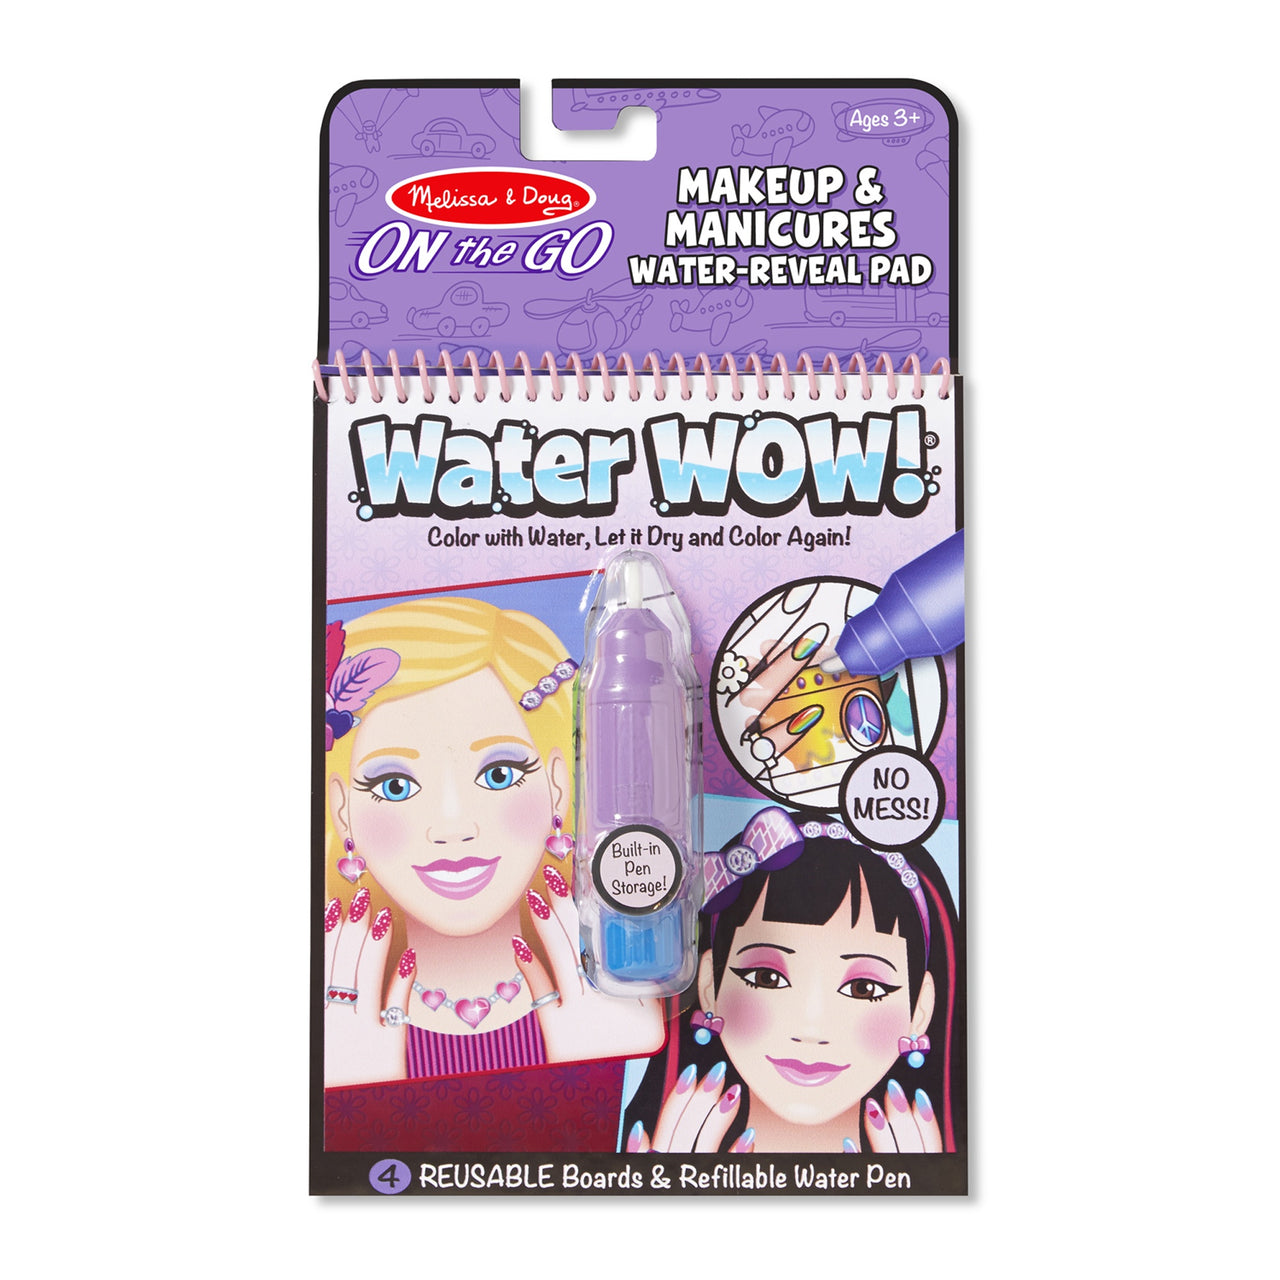 Melissa & Doug Water Wow Makeup and Manicure Water-Reveal Pad